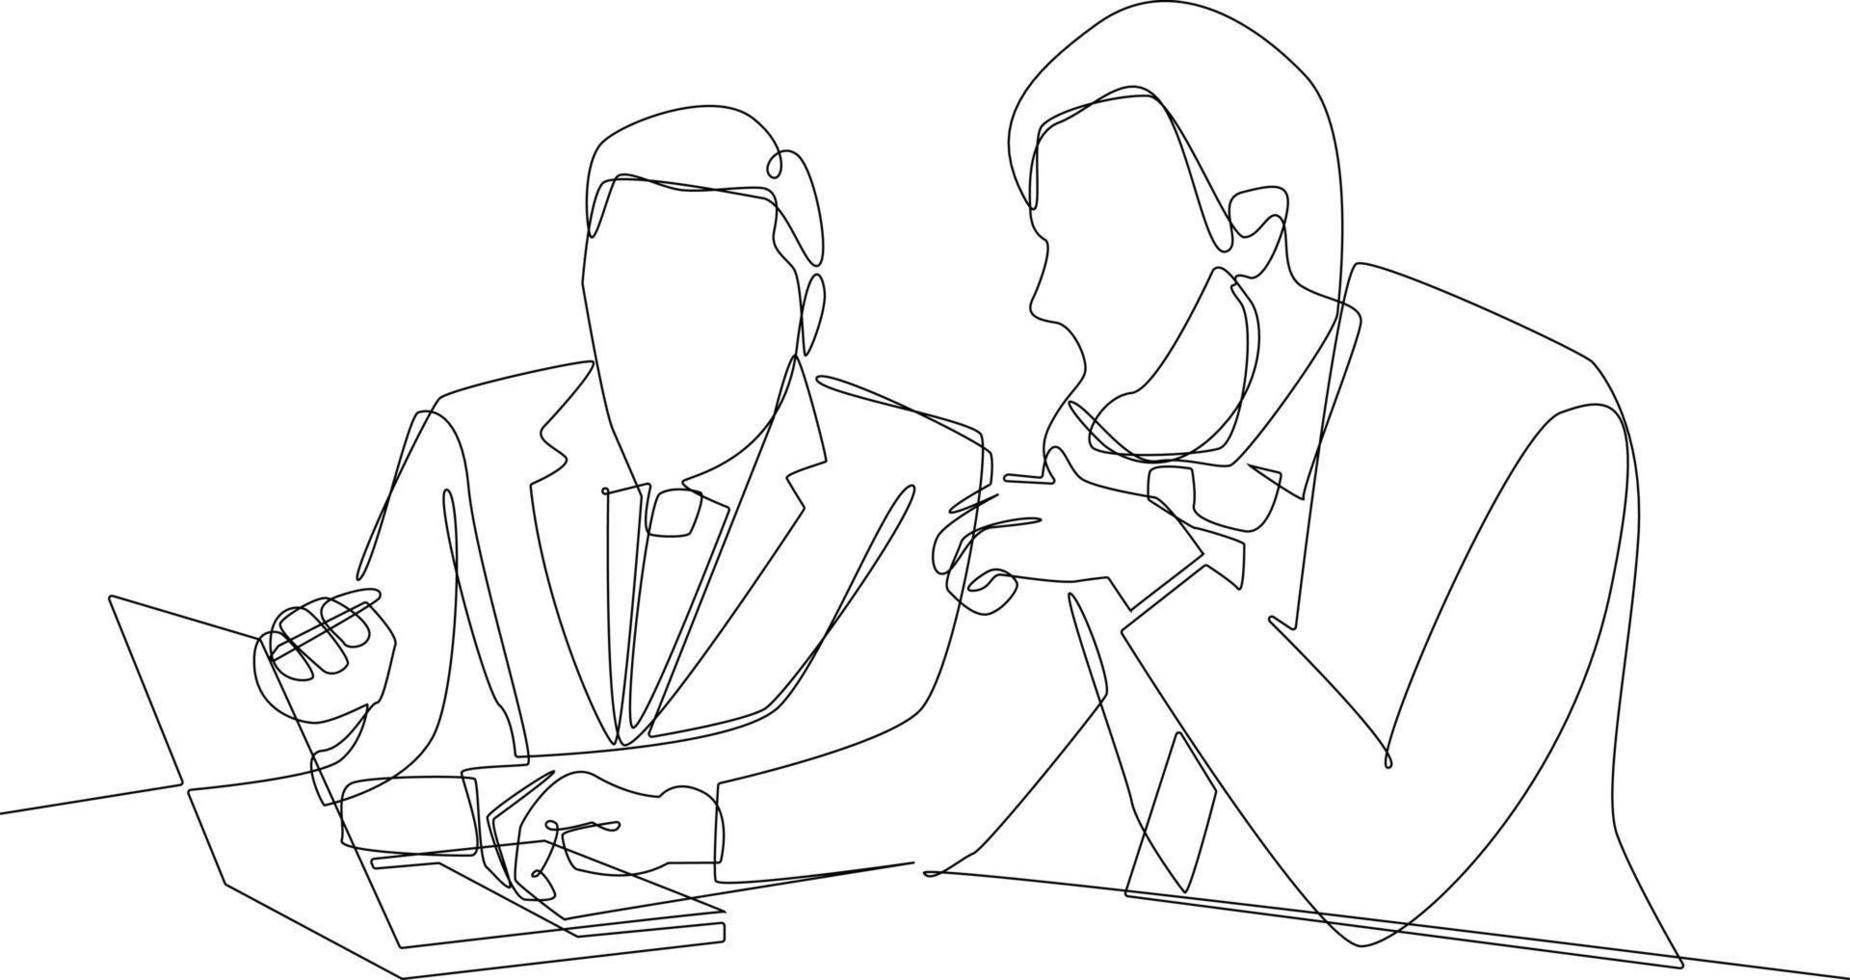 Continuous one line drawing two smart businessmen discussing project in office. Business consulting concept. Single line draw design vector graphic illustration.